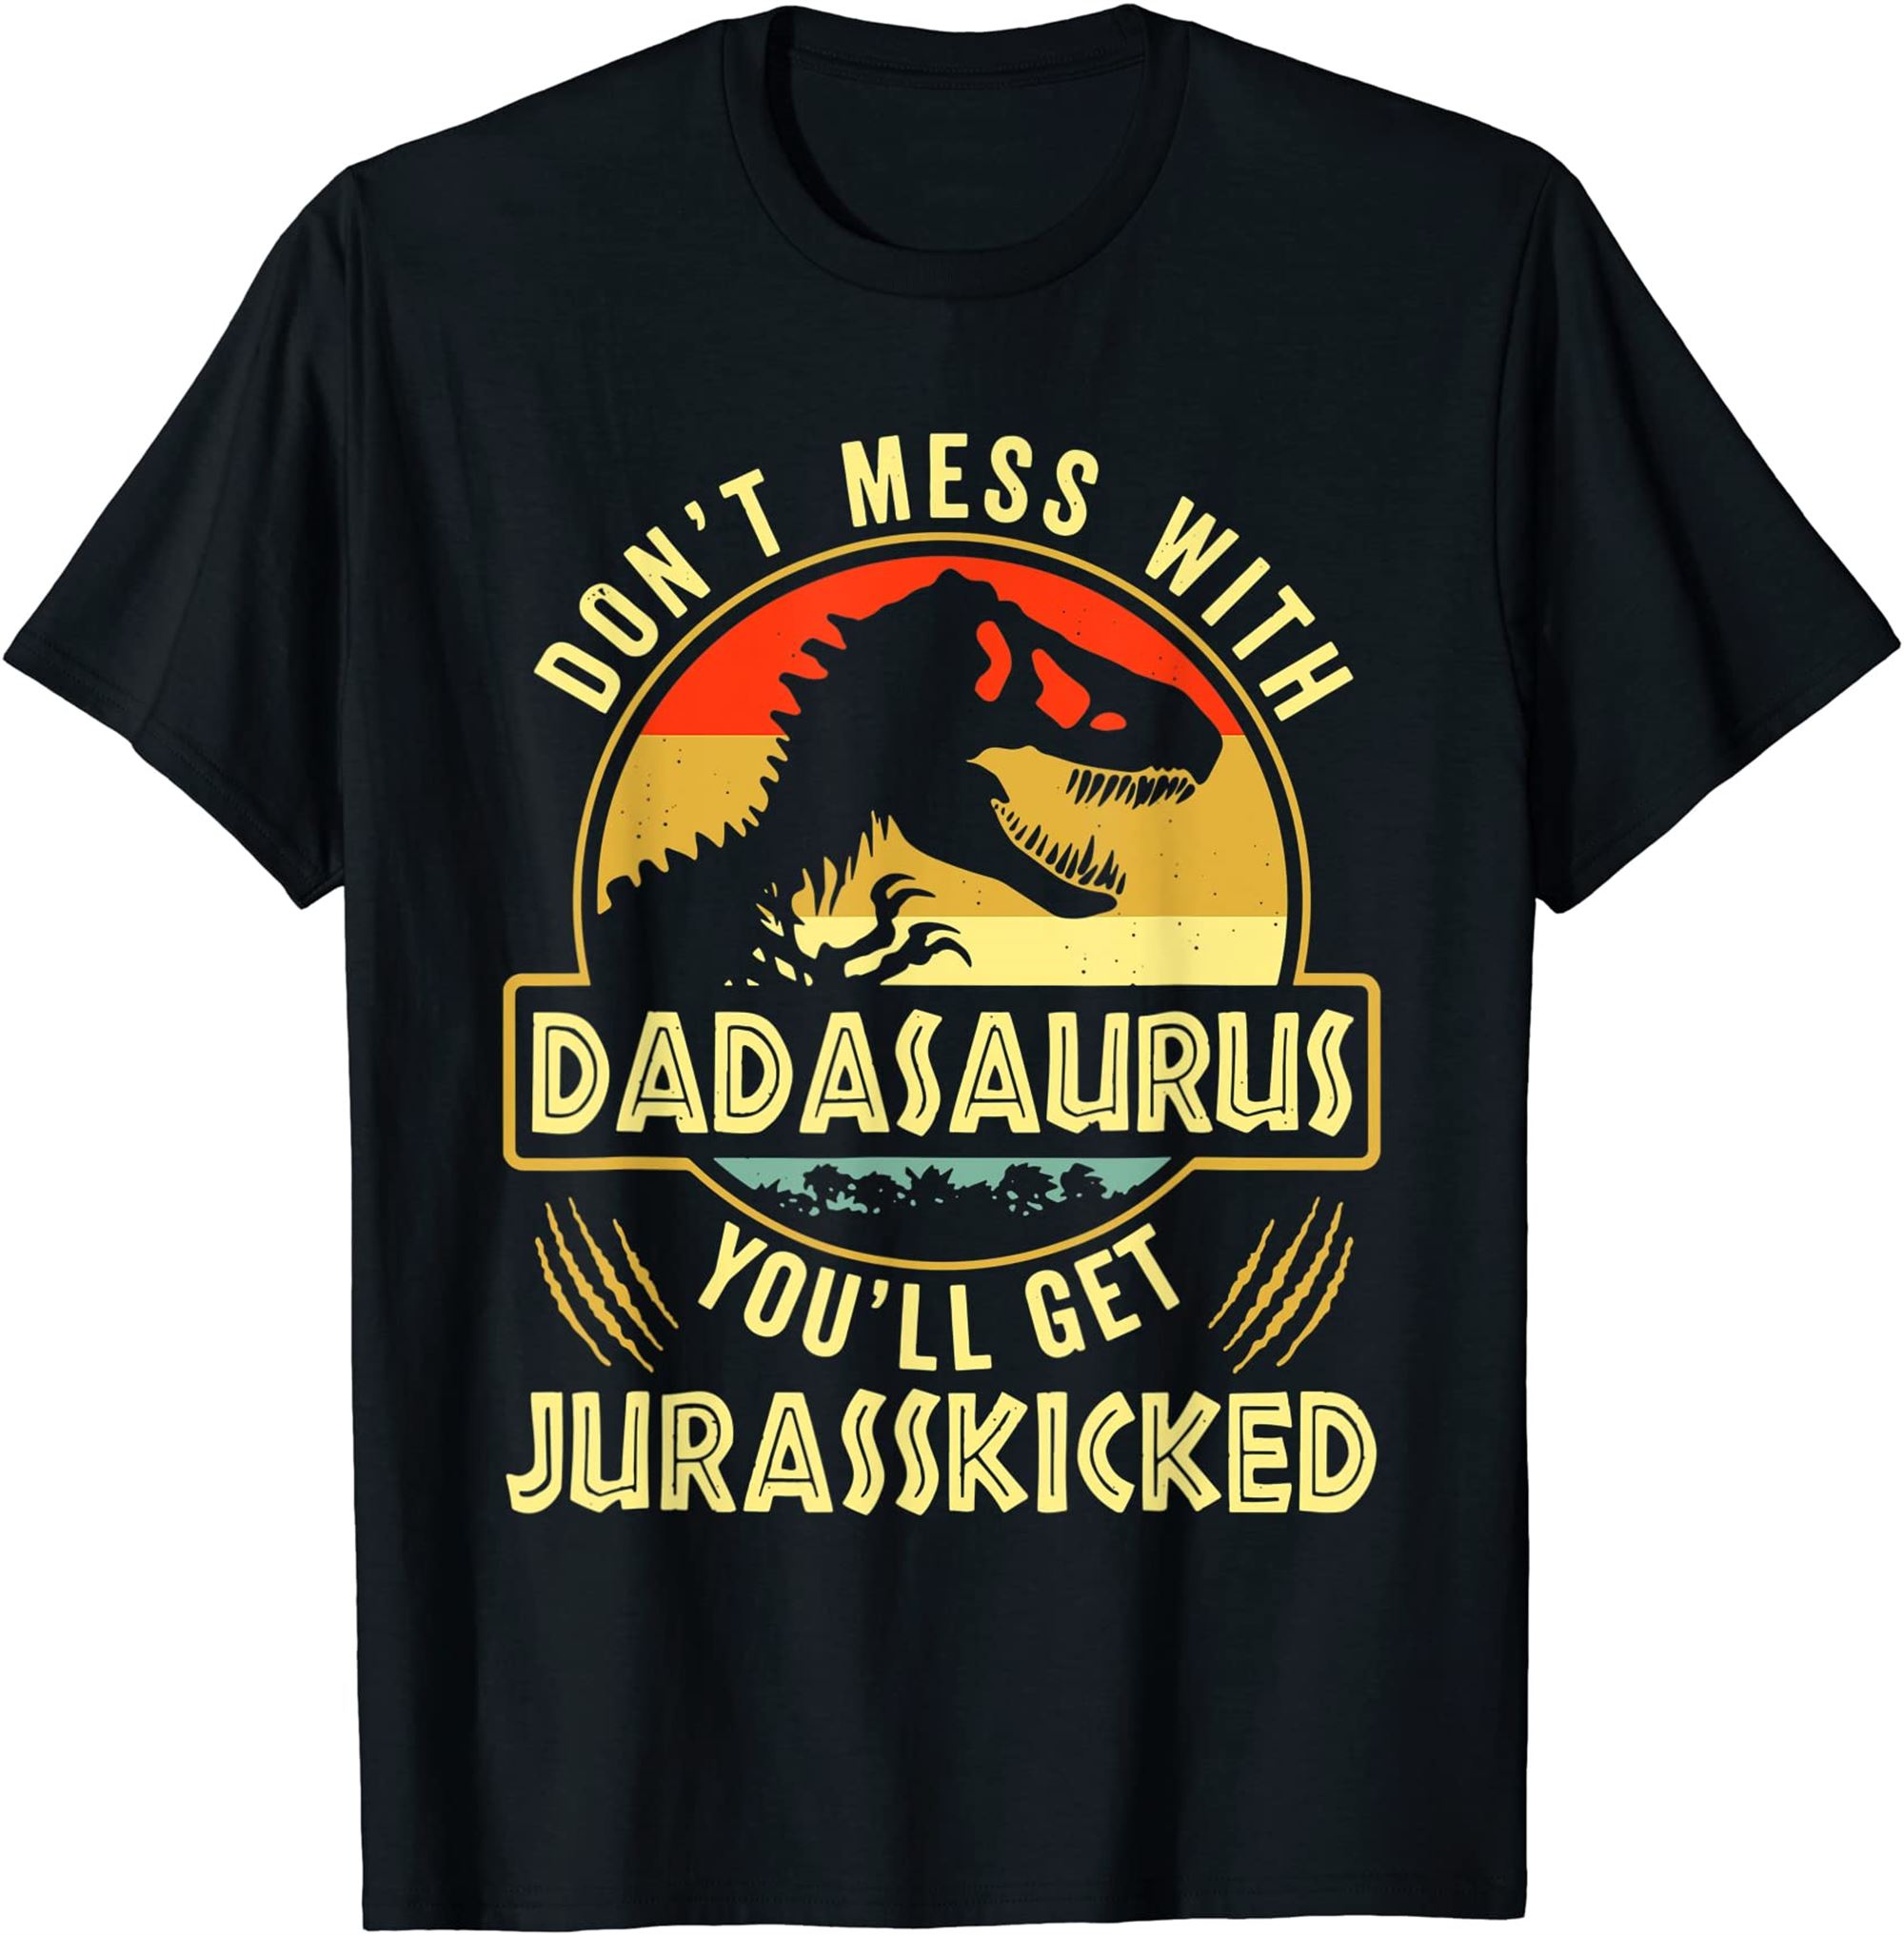 Funny Dad Dont Mess With Dadasaurus Youll Get Jurasskicked T-shirt Full Size Up To 5xl